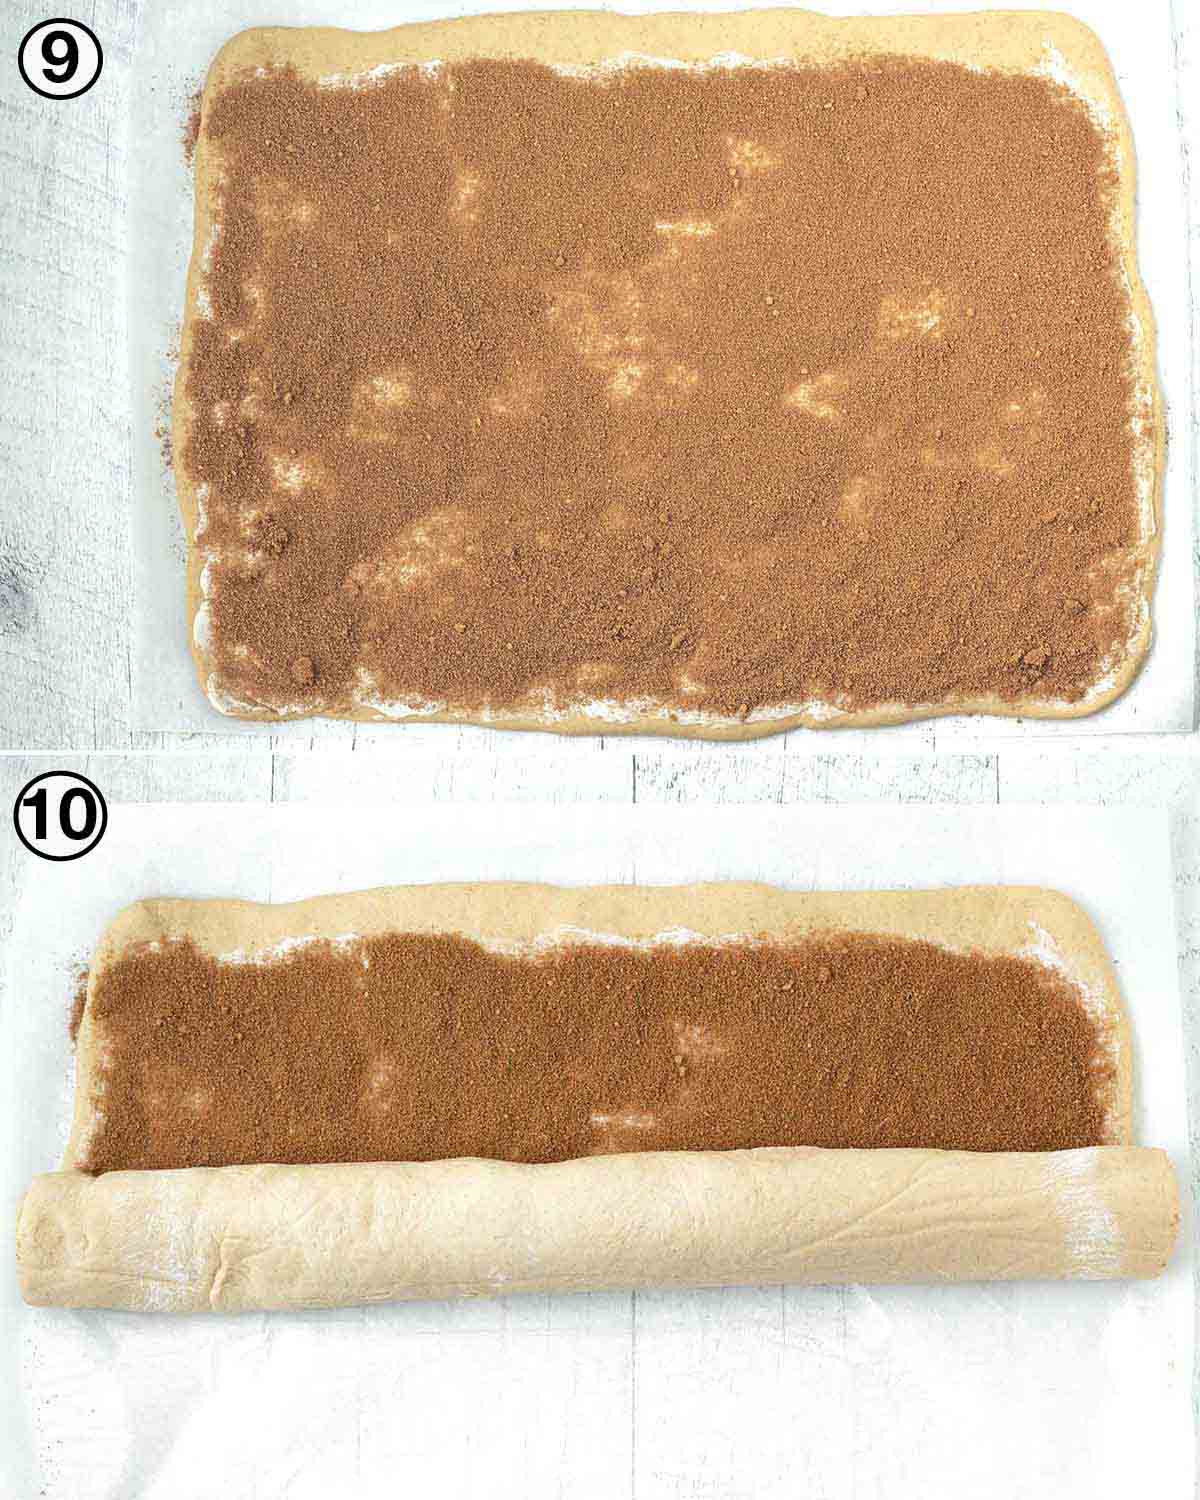 A collage of two images showing the fifth sequence of steps needed to make vegan cinnamon rolls.